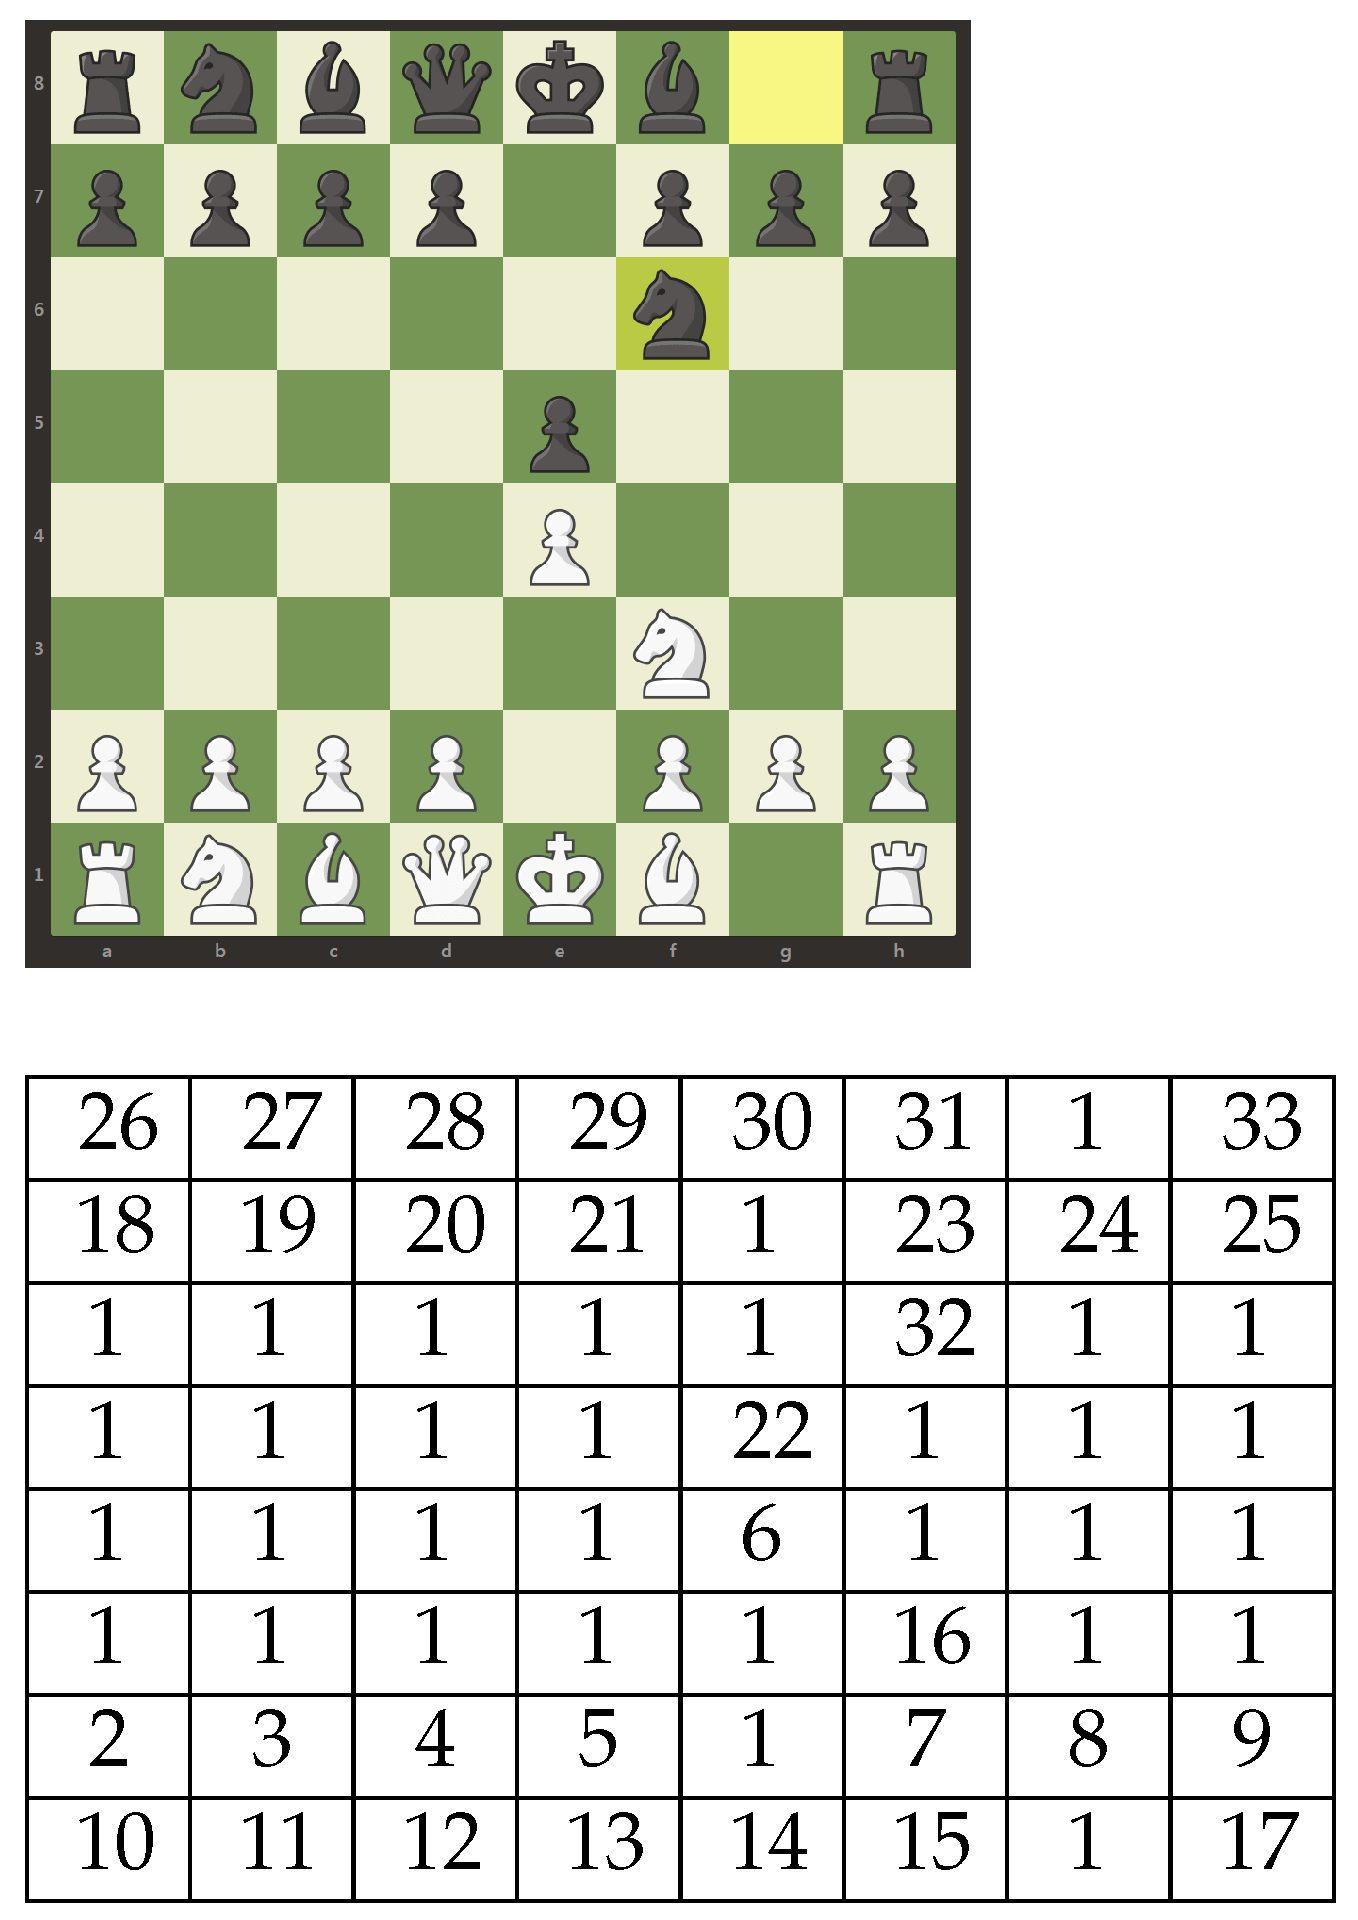 Chess rating system - Chess Forums - Page 106 